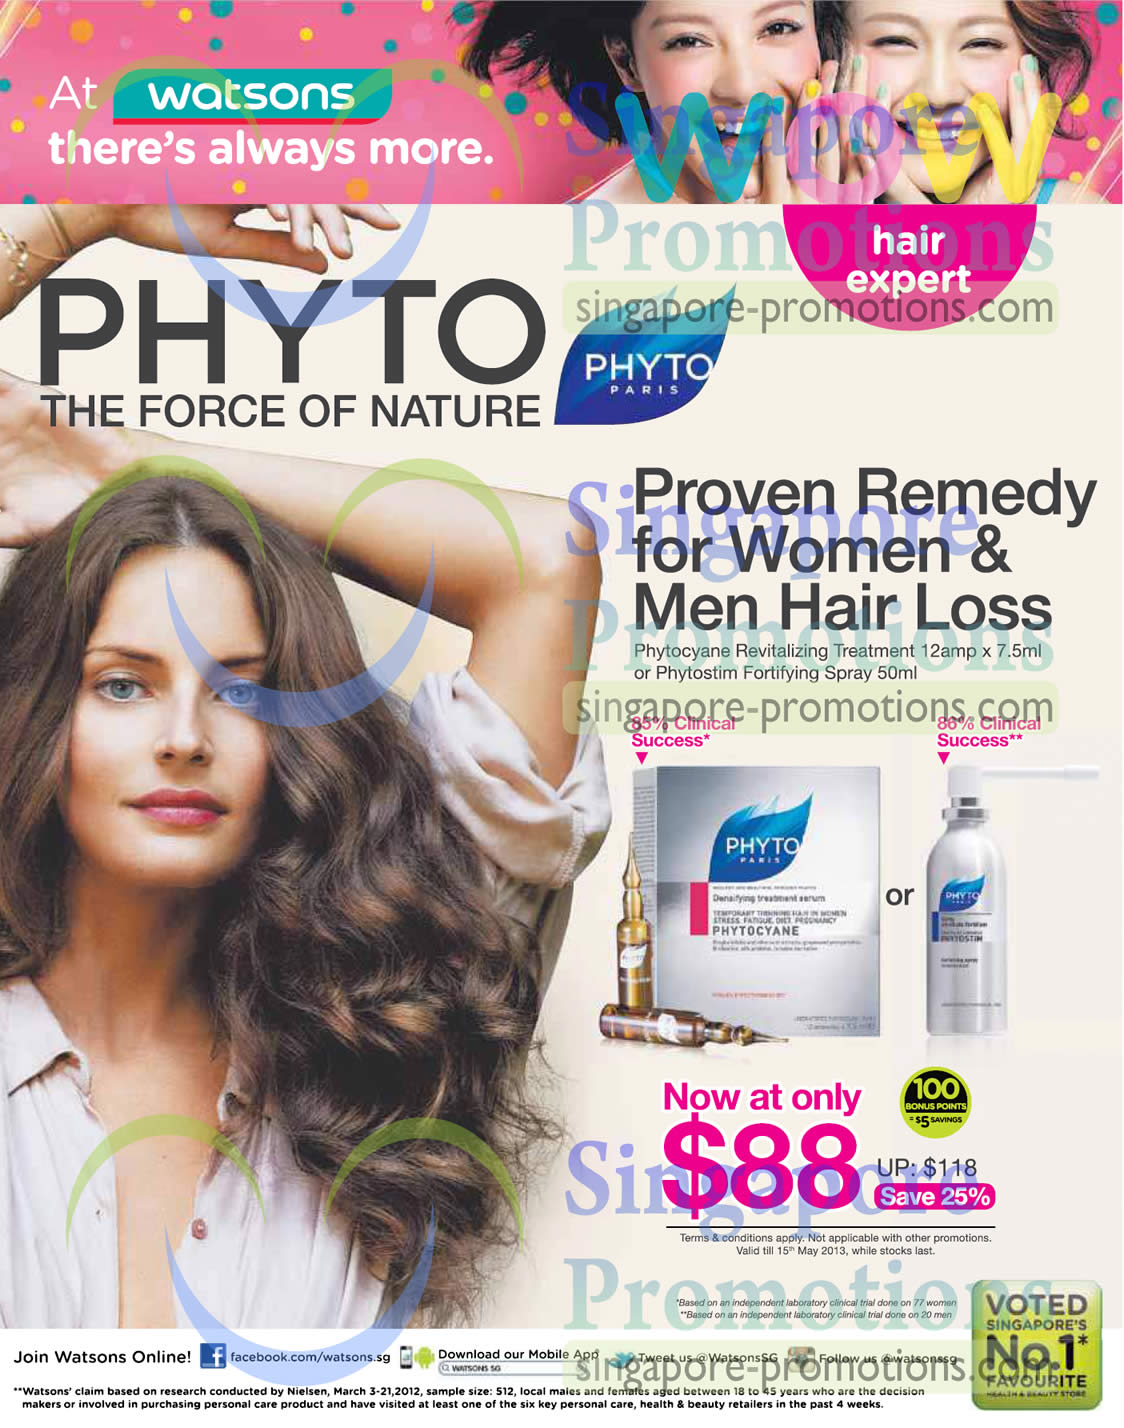 Phyto Paris » Watsons Personal Care, Health, Cosmetics & Beauty Offers